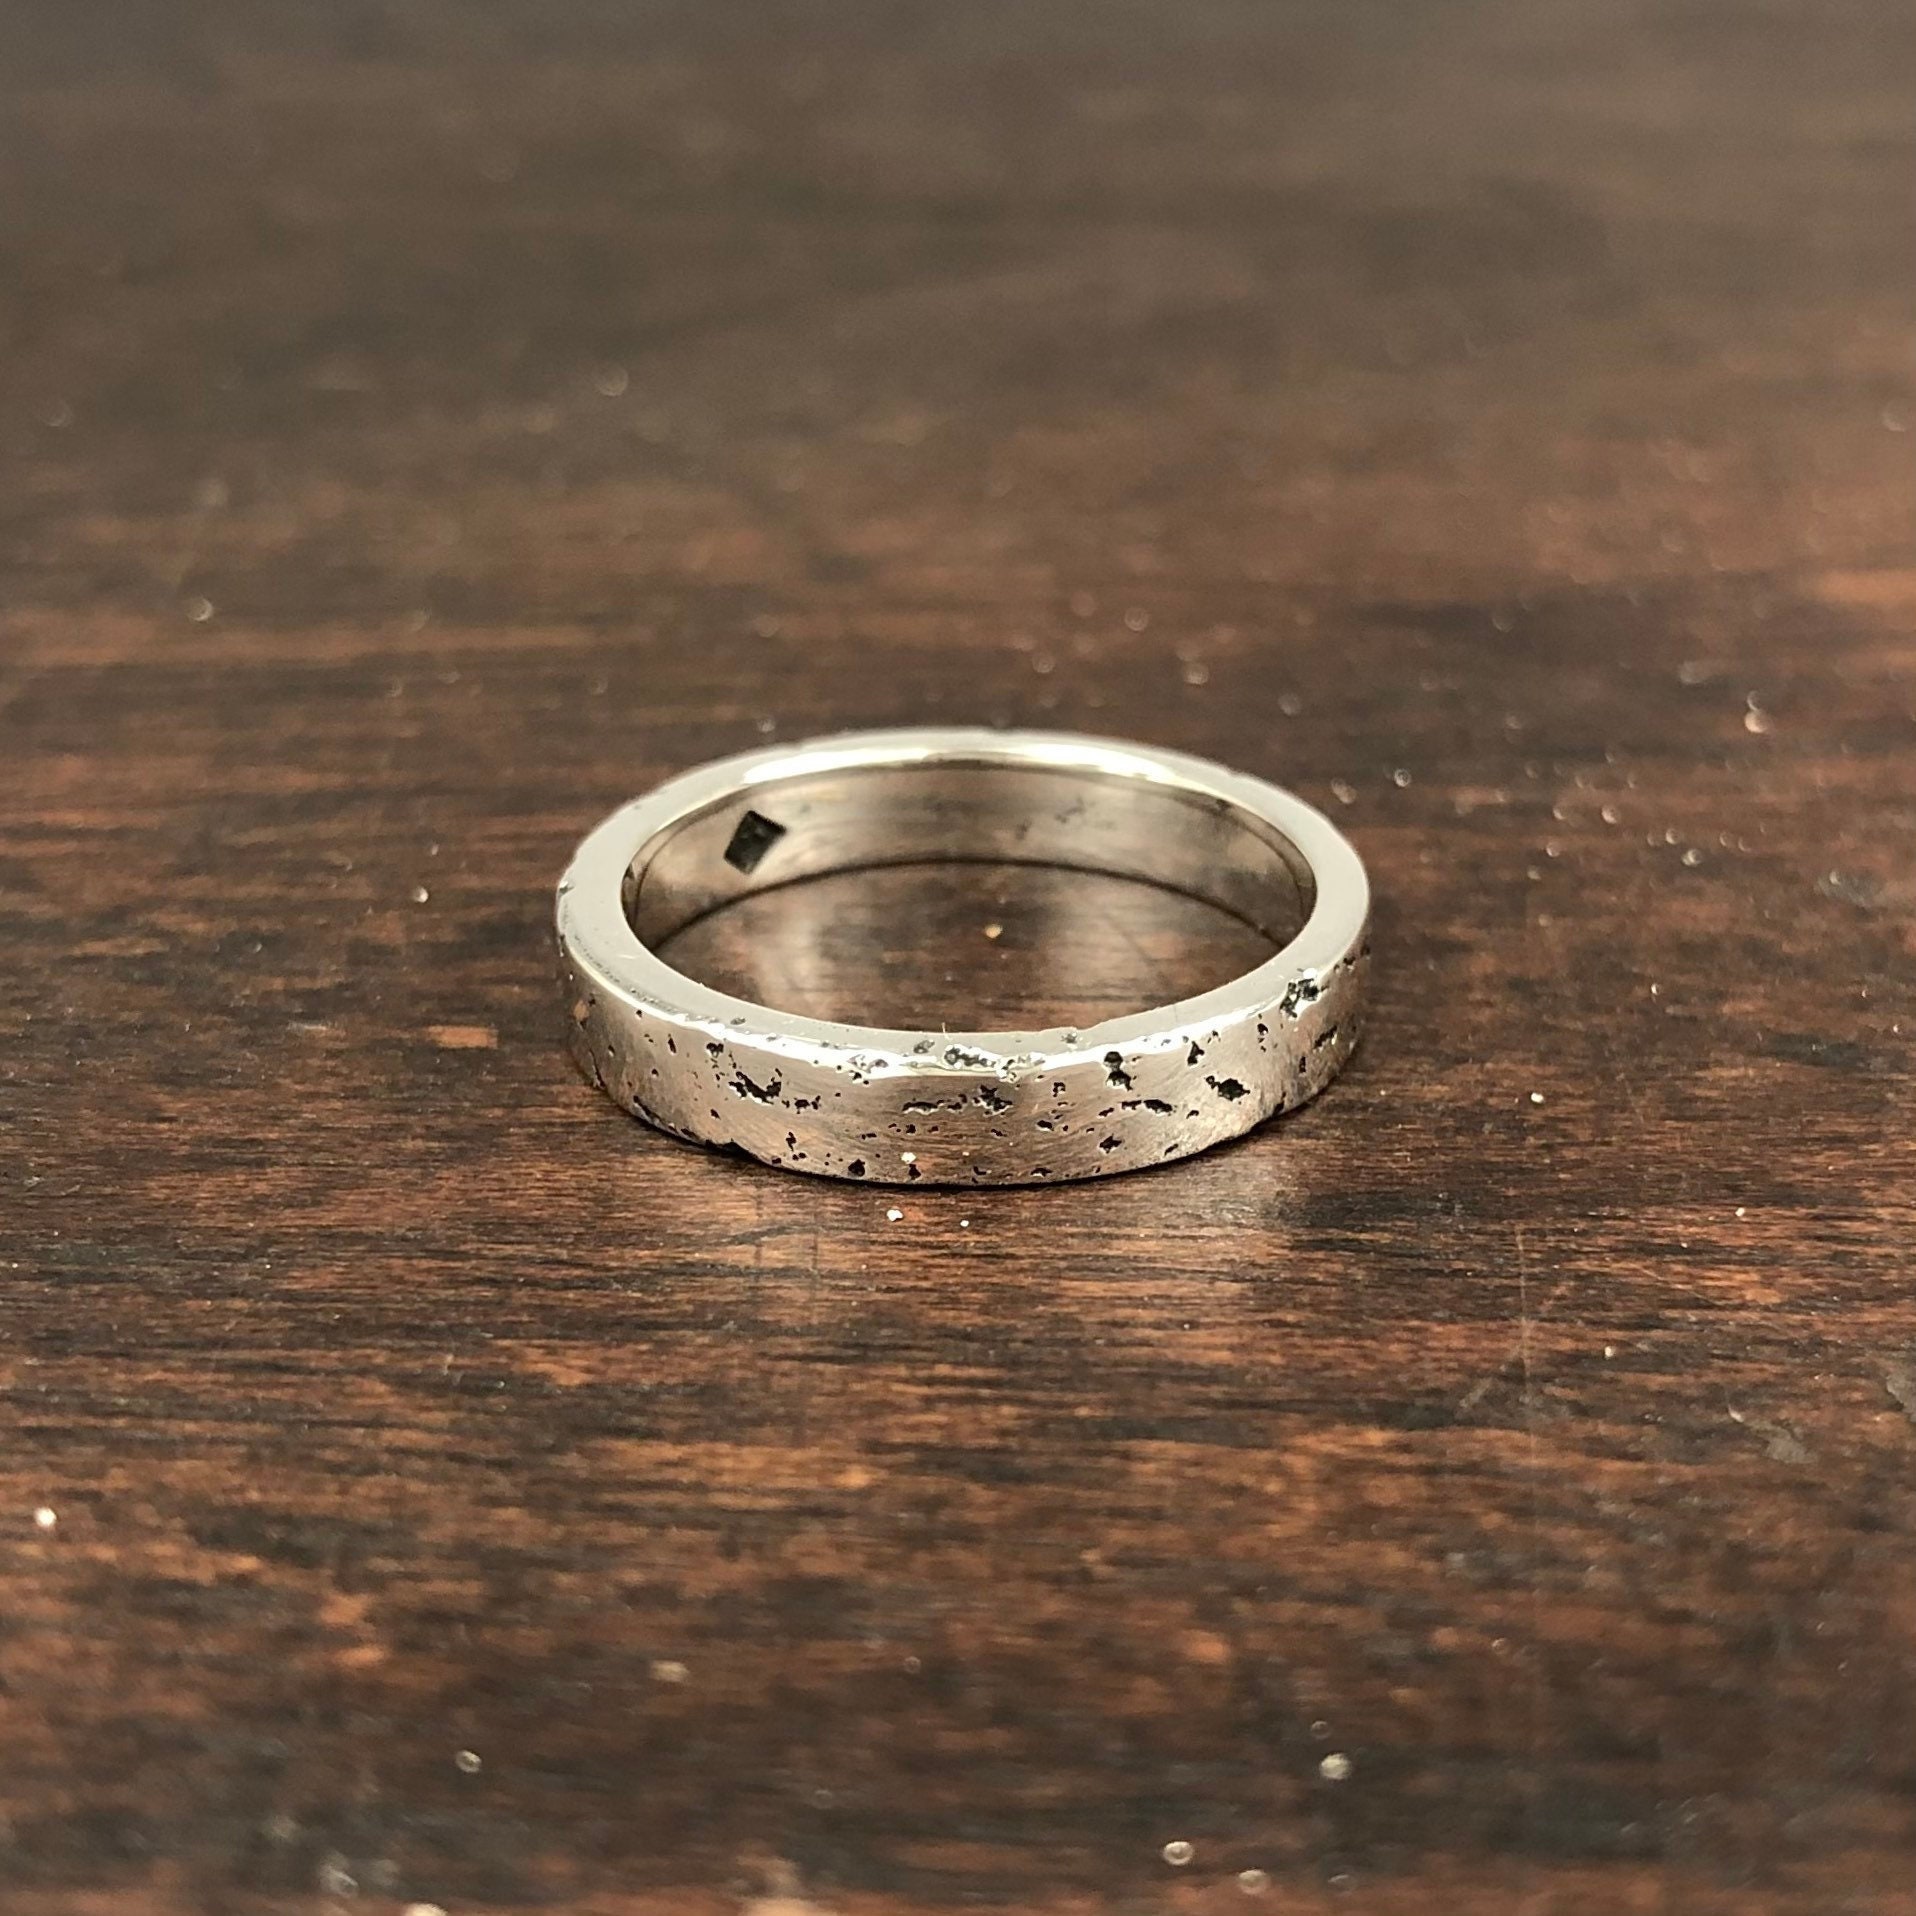 Thin Silver Ring, Elegant Simple Band, Rustic Sterling Sand Cast Textured Wedding Ring